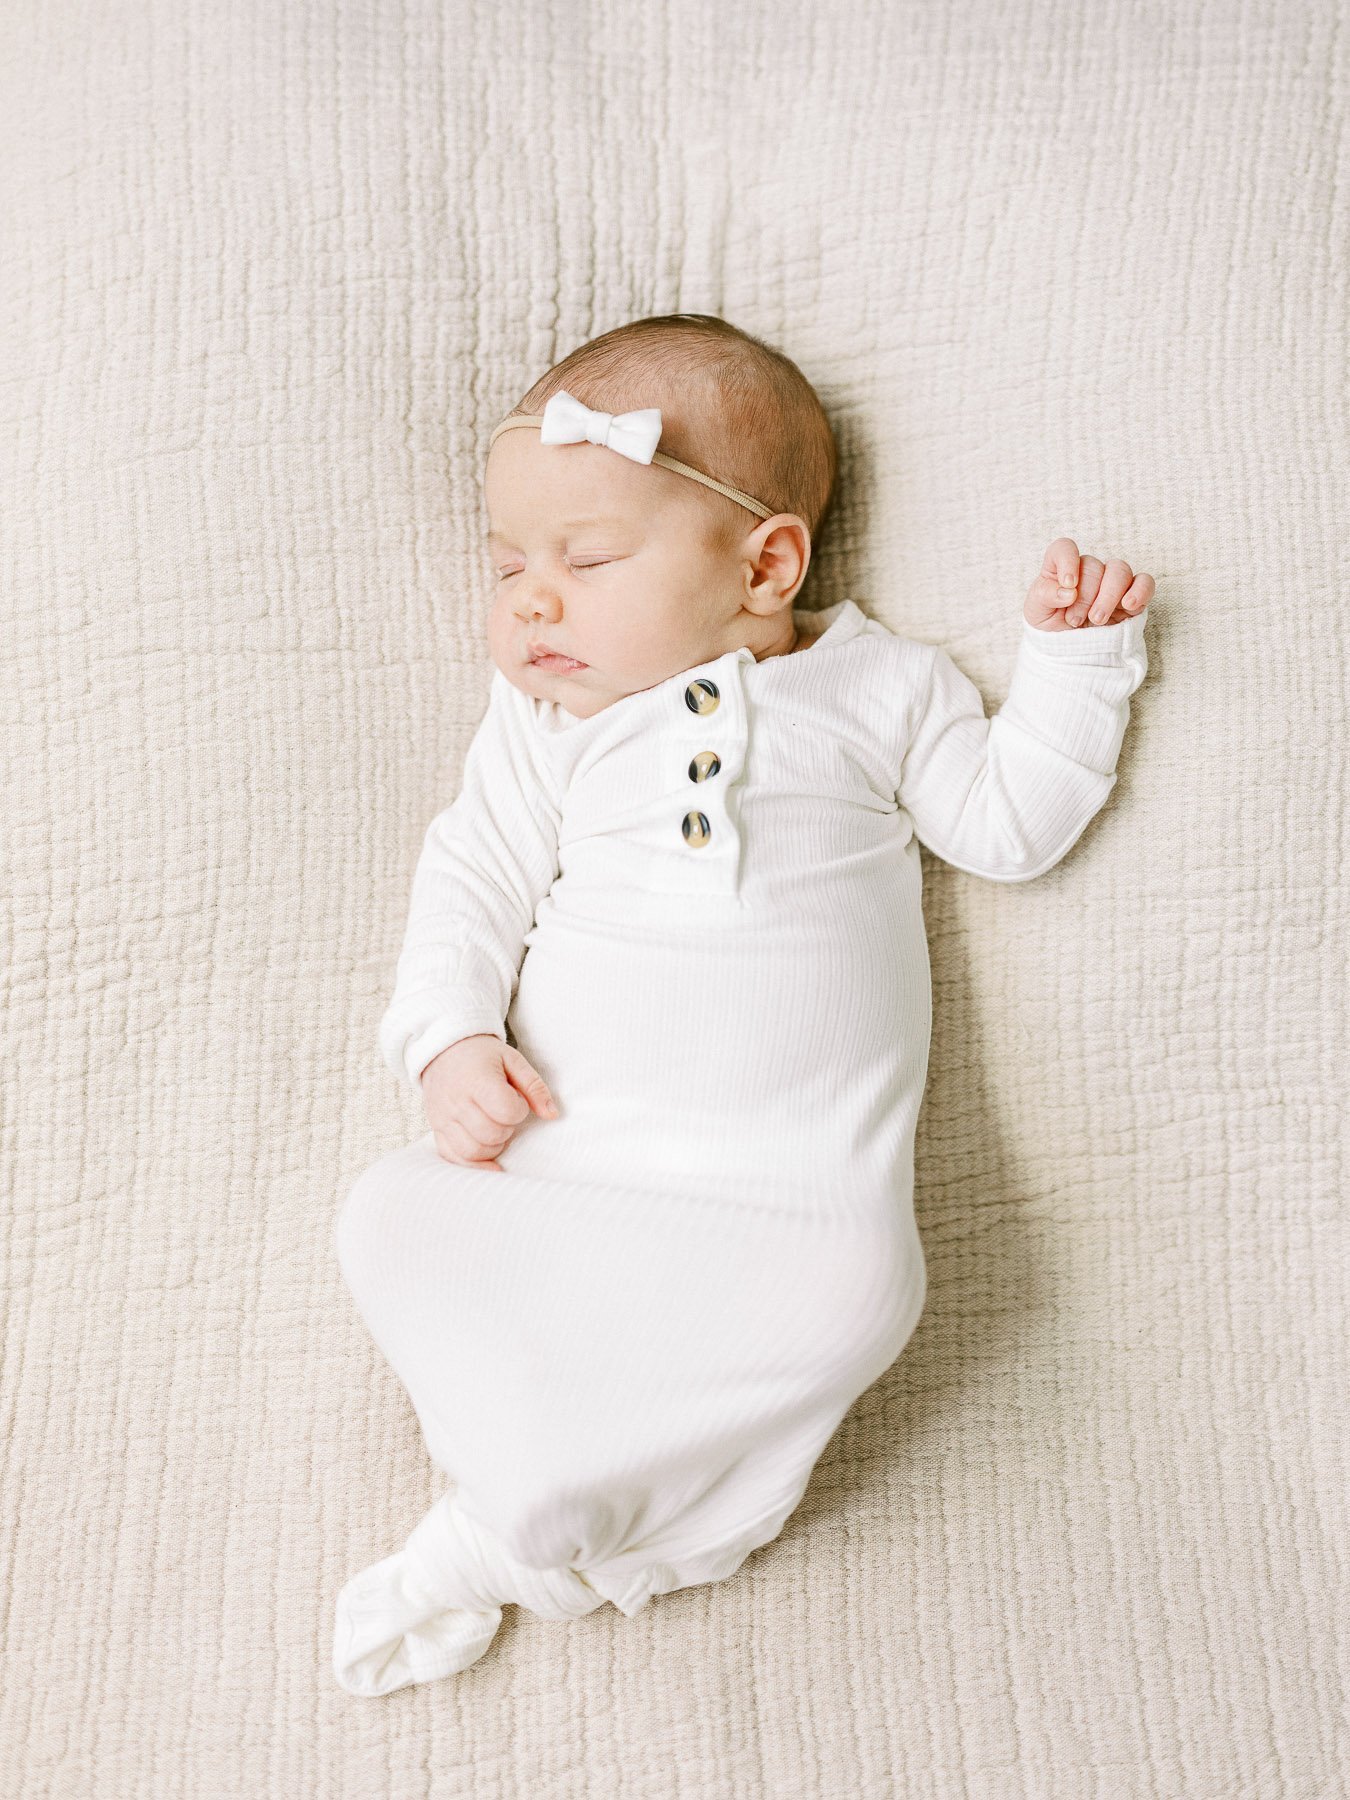 Upstate NY Newborn Photographer by Michelle Lange Photography-2.jpg